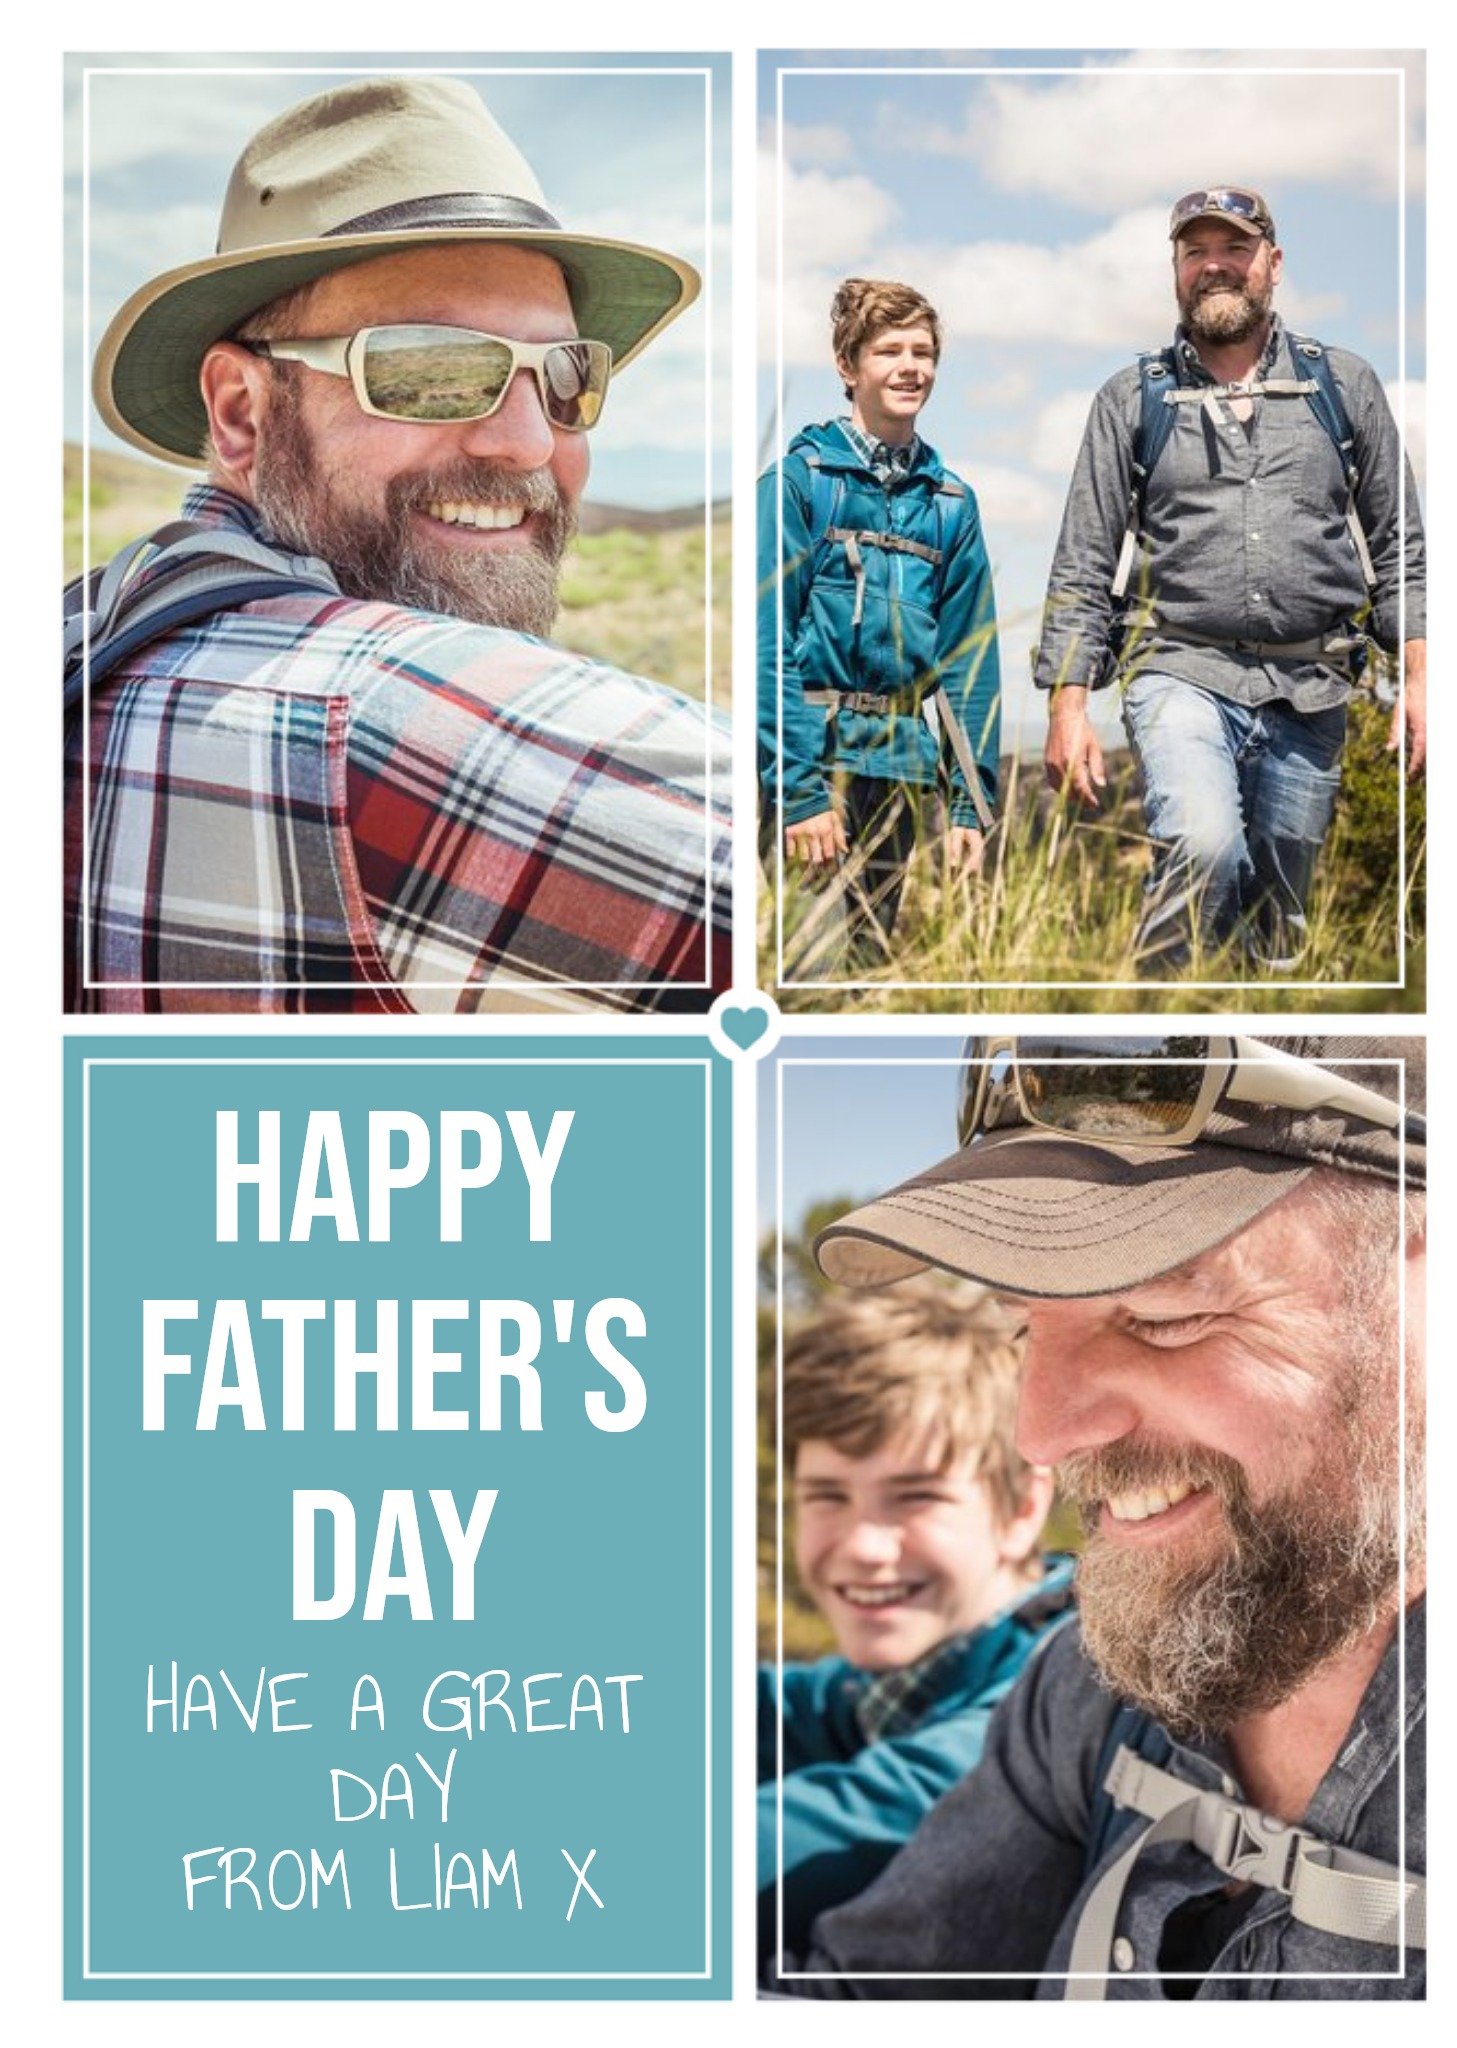 Moonpig Bright Teal Happy Father's Day Multi-Photo Card, Large